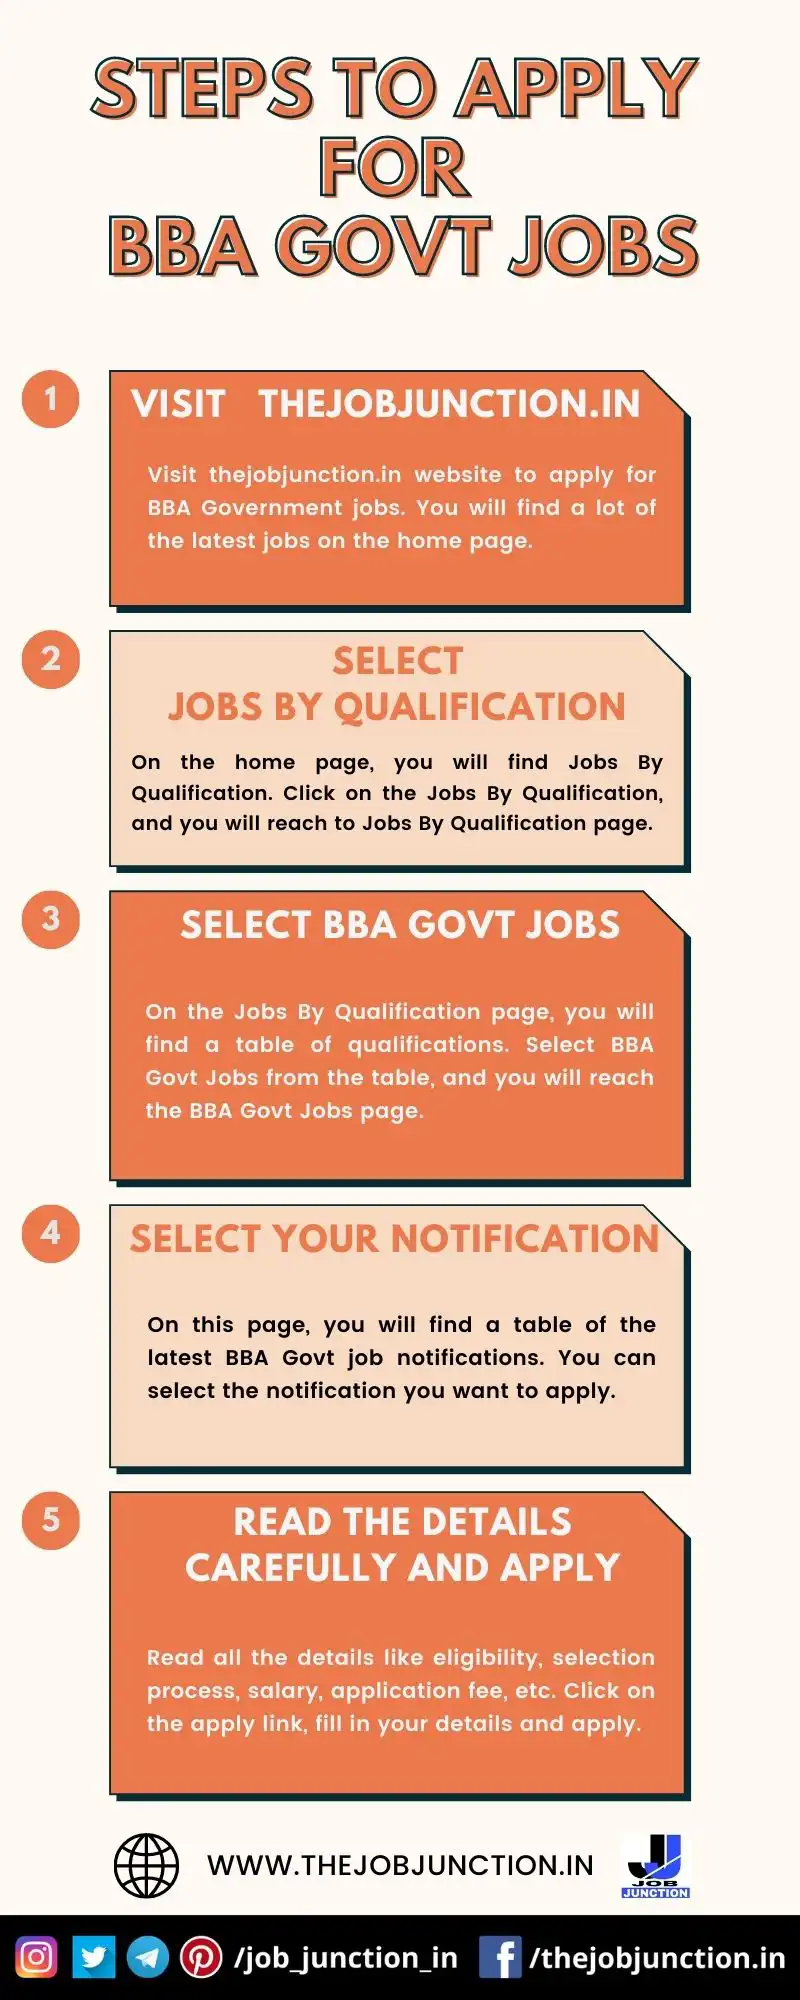 STEPS TO APPLY FOR BBA GOVT JOBS